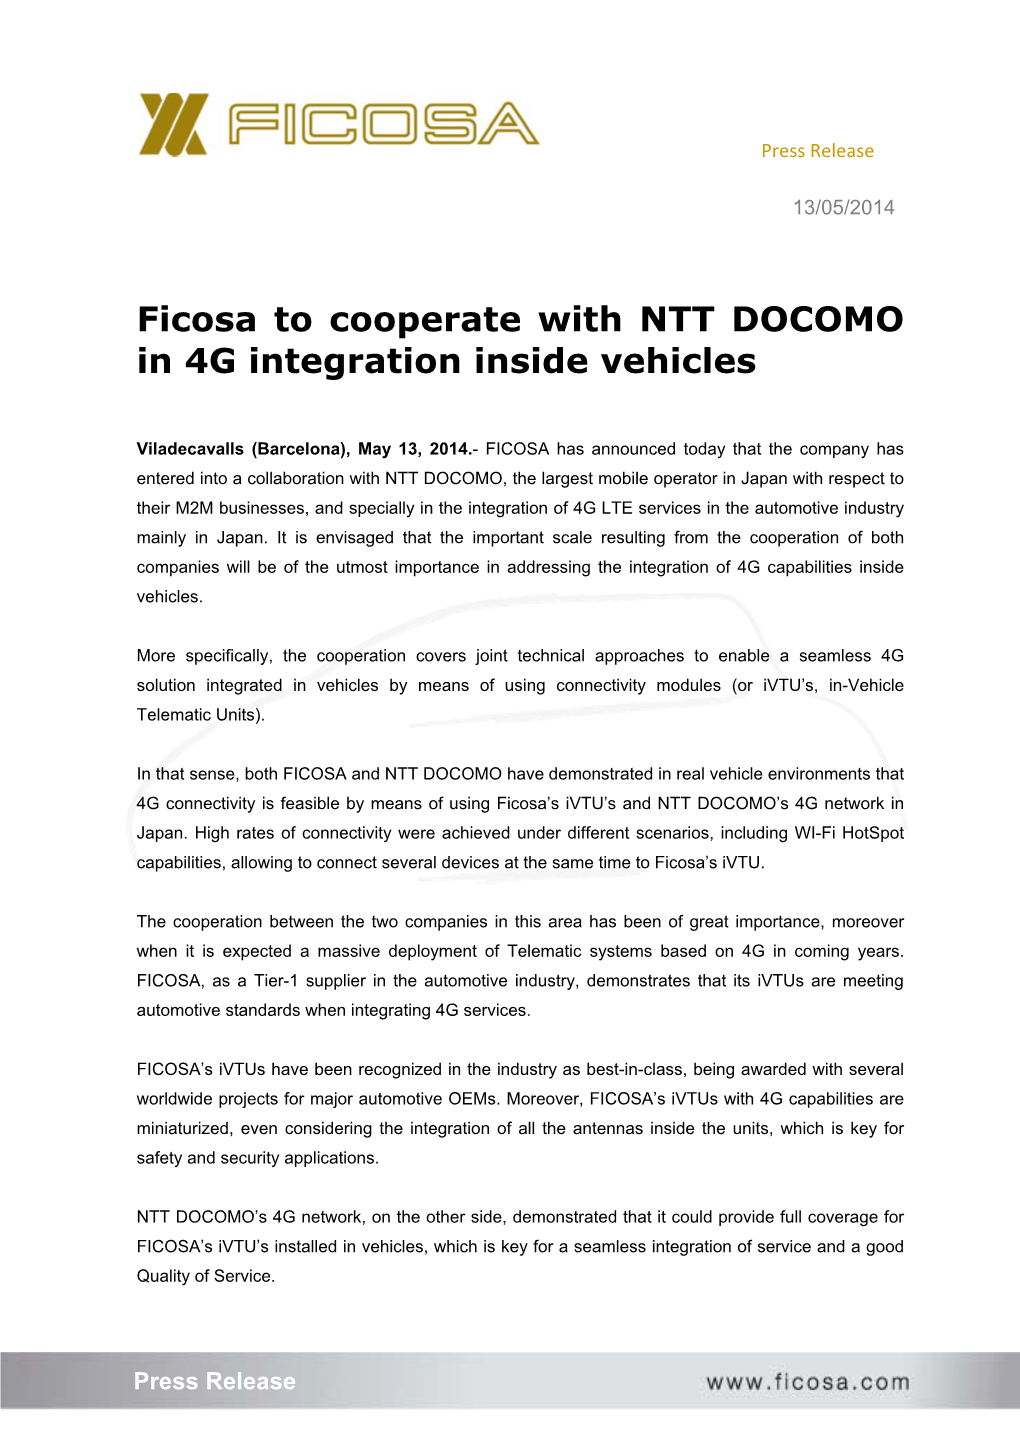 Ficosa to Cooperate with NTT DOCOMO in 4G Integration Inside Vehicles